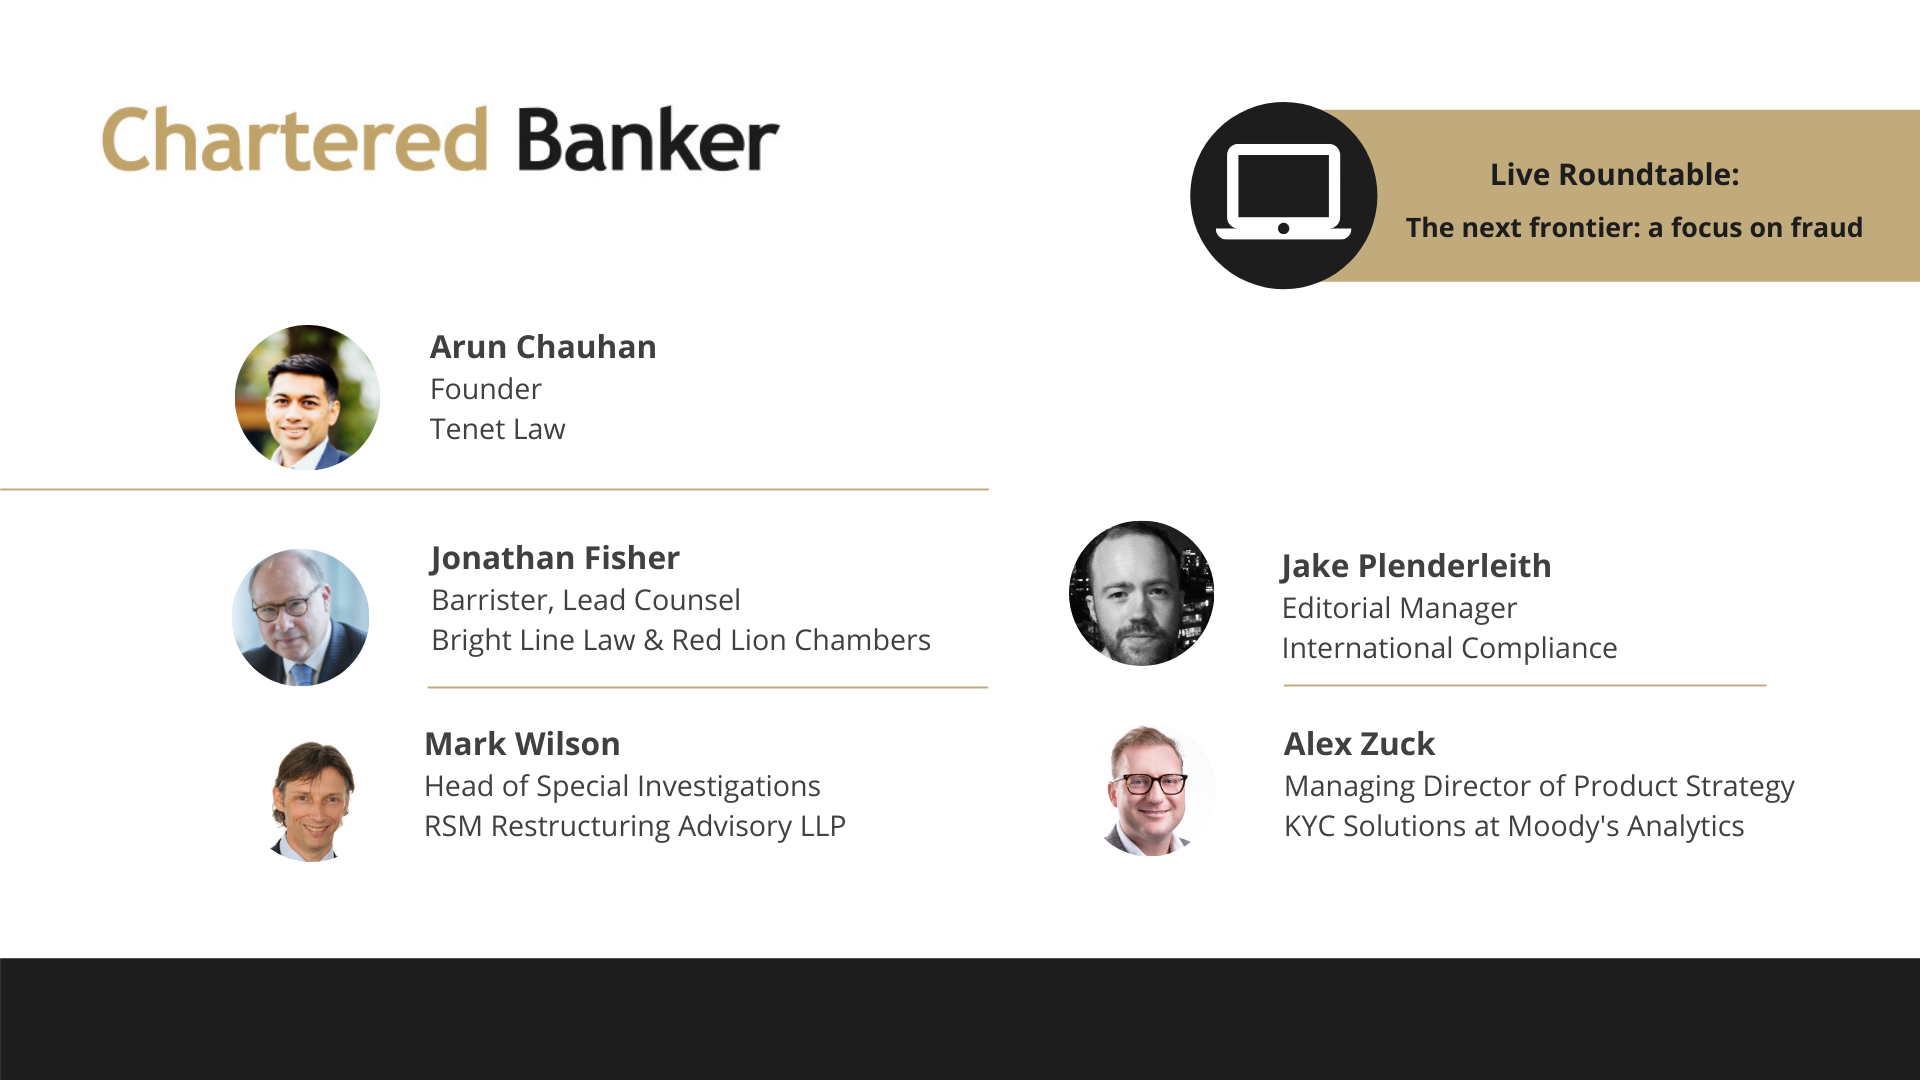 The next frontier: a focus on fraud Roundtable